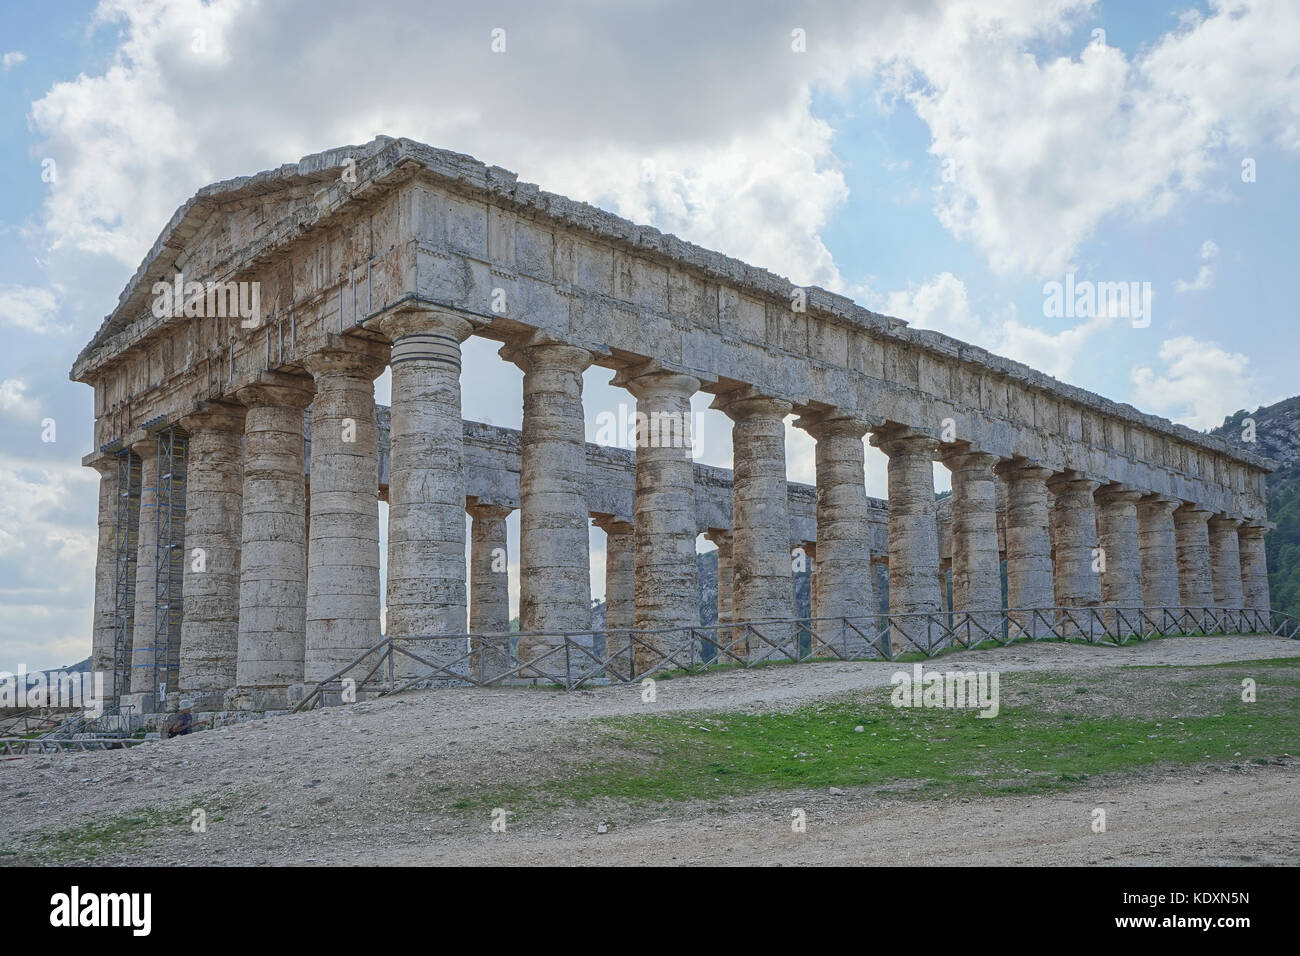 The Greek temple at the historical site of Segesta. From a series of travel photos in Sicily, Italy. Photo date: Saturday, September 30, 2017. Photo c Stock Photo